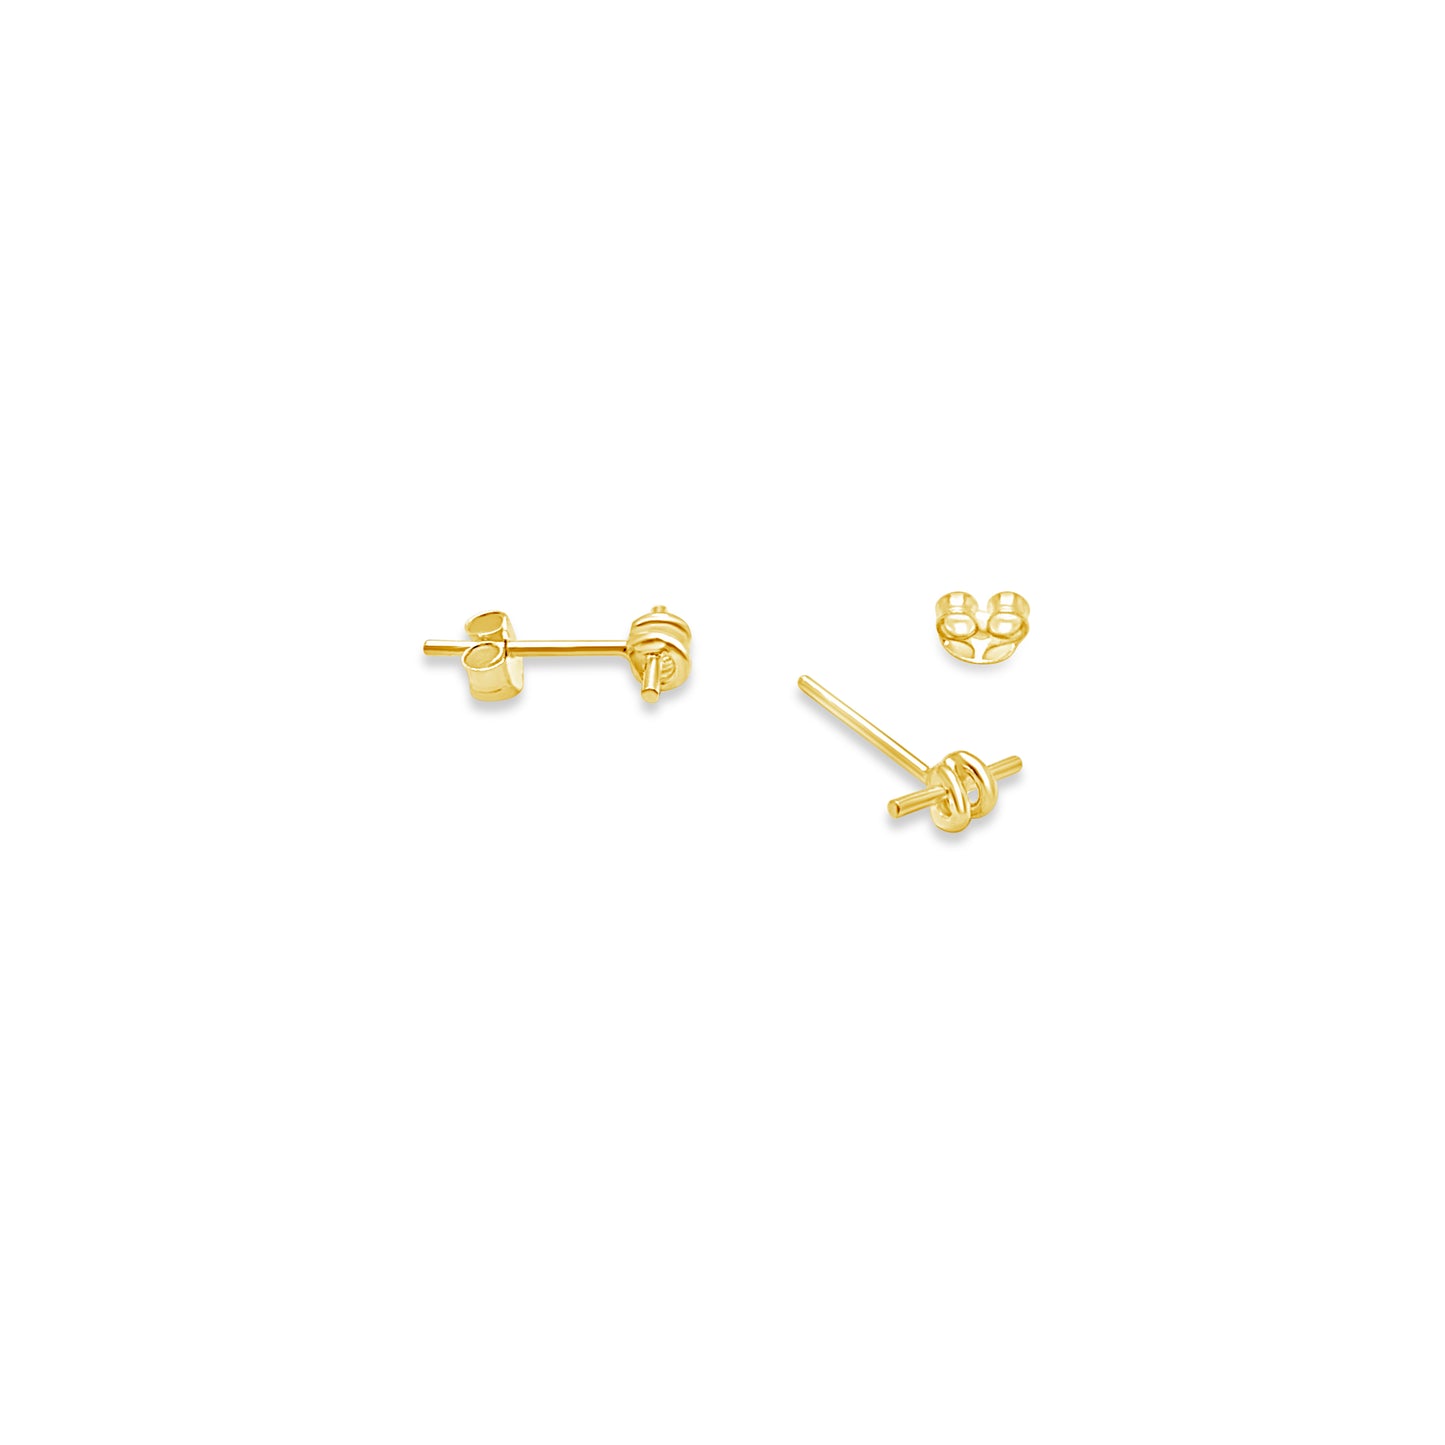 Knotted Bar Earrings, Gold